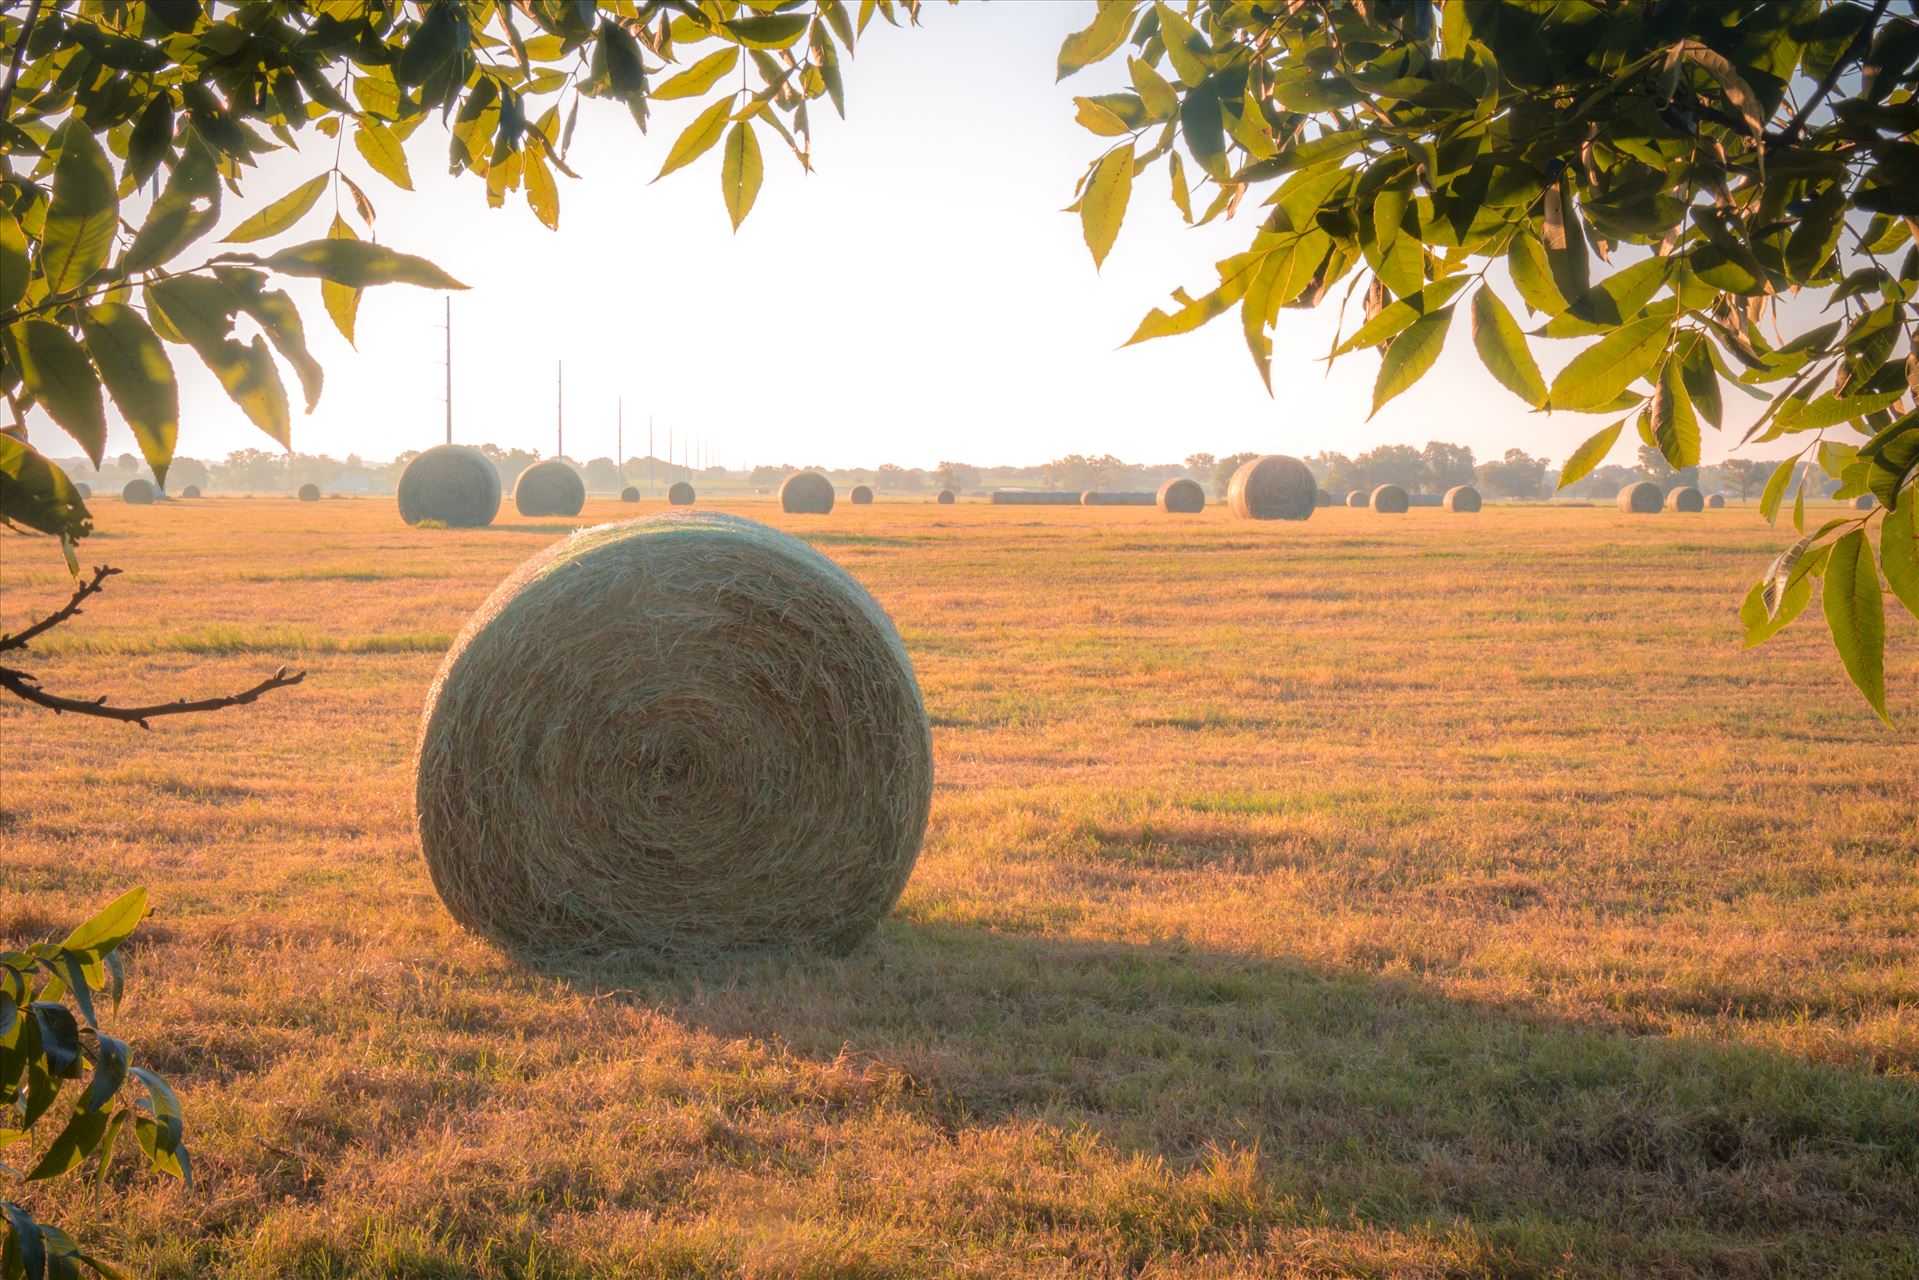 20170819_Hay Field_025.jpg  by Charles Smith Photography